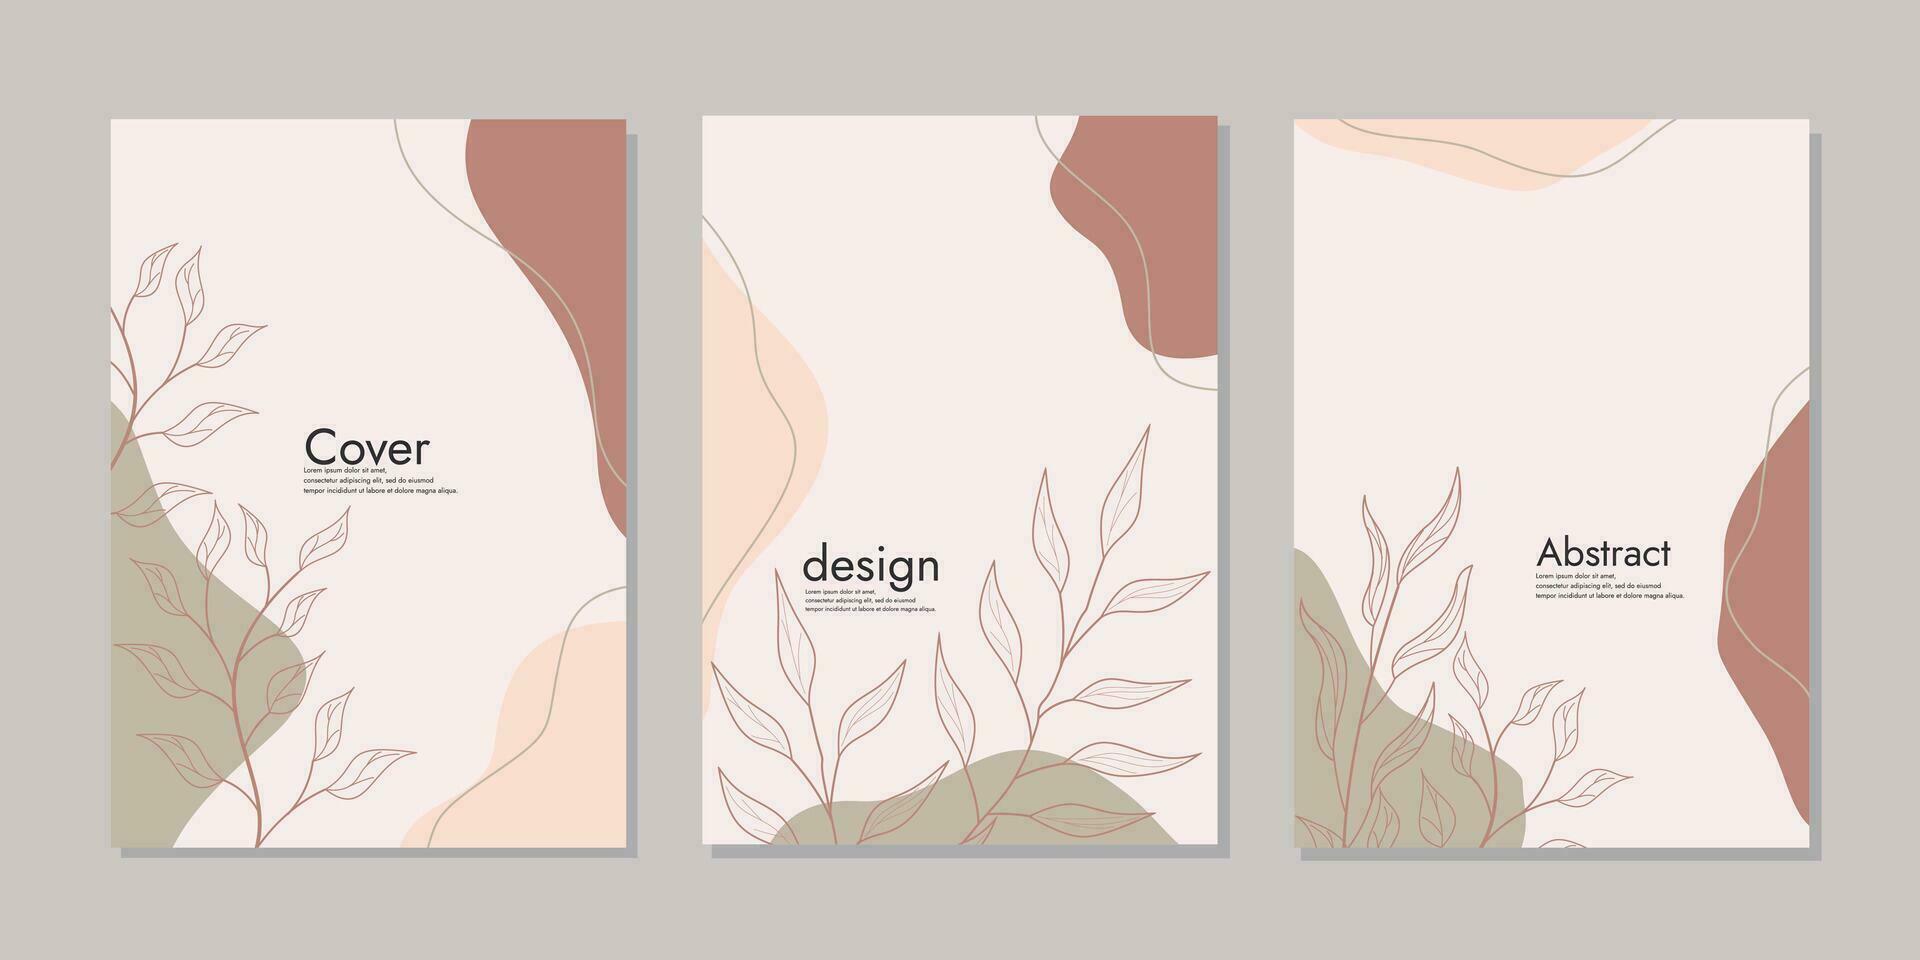 set of book cover designs with hand drawn floral decorations For book, binder, diary, planner, brochure, notebook, catalog. abstract boho botanical background A4 size. vector